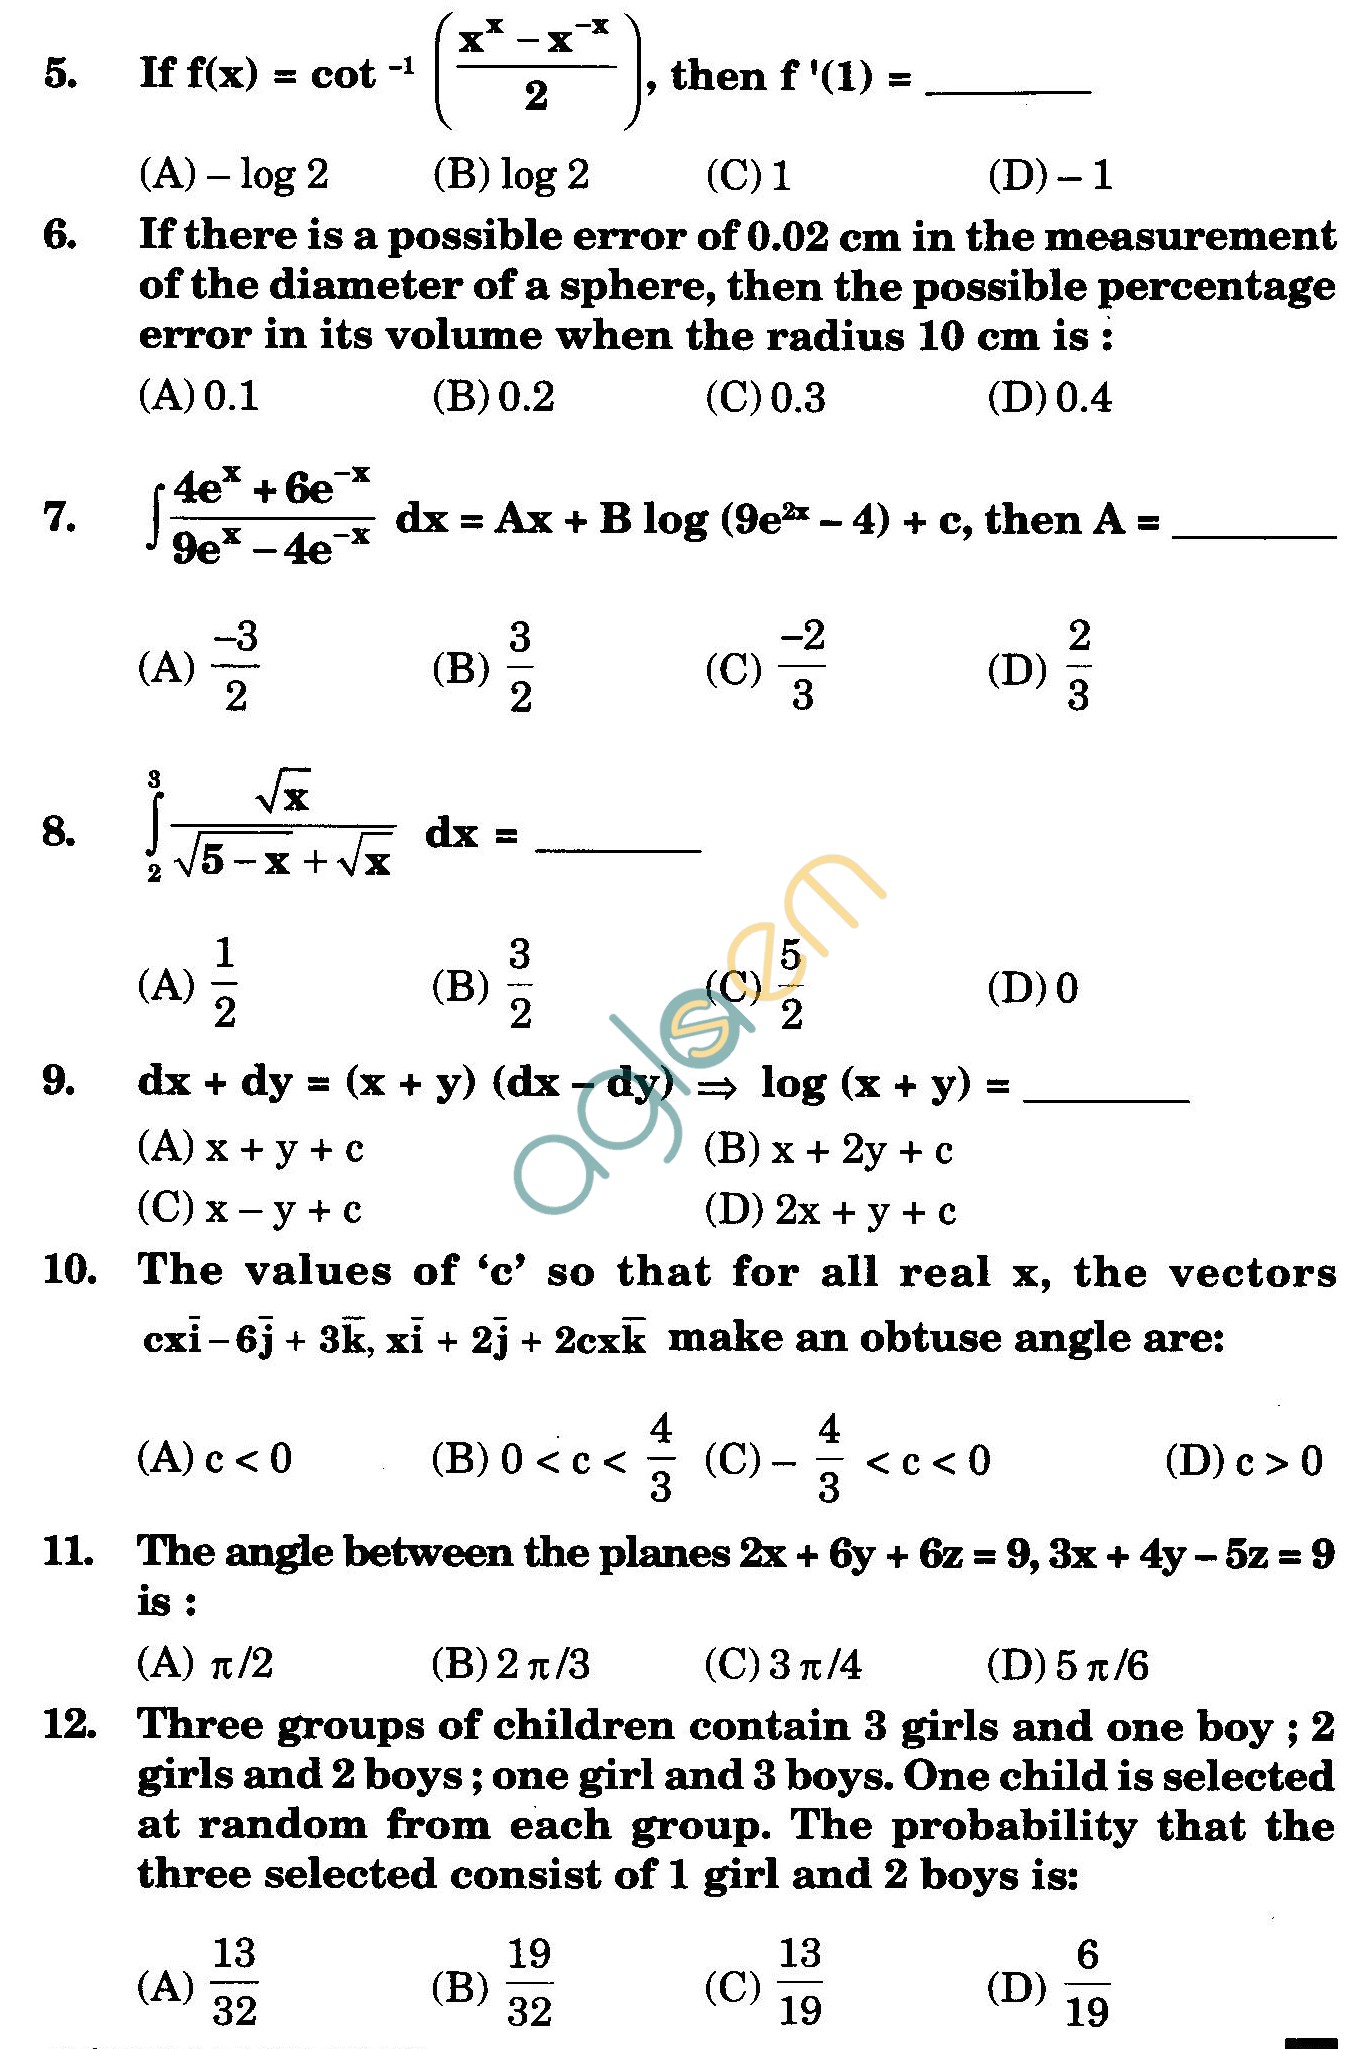 NSTSE 2010 Class XII PCM Question Paper with Answers - Mathematics